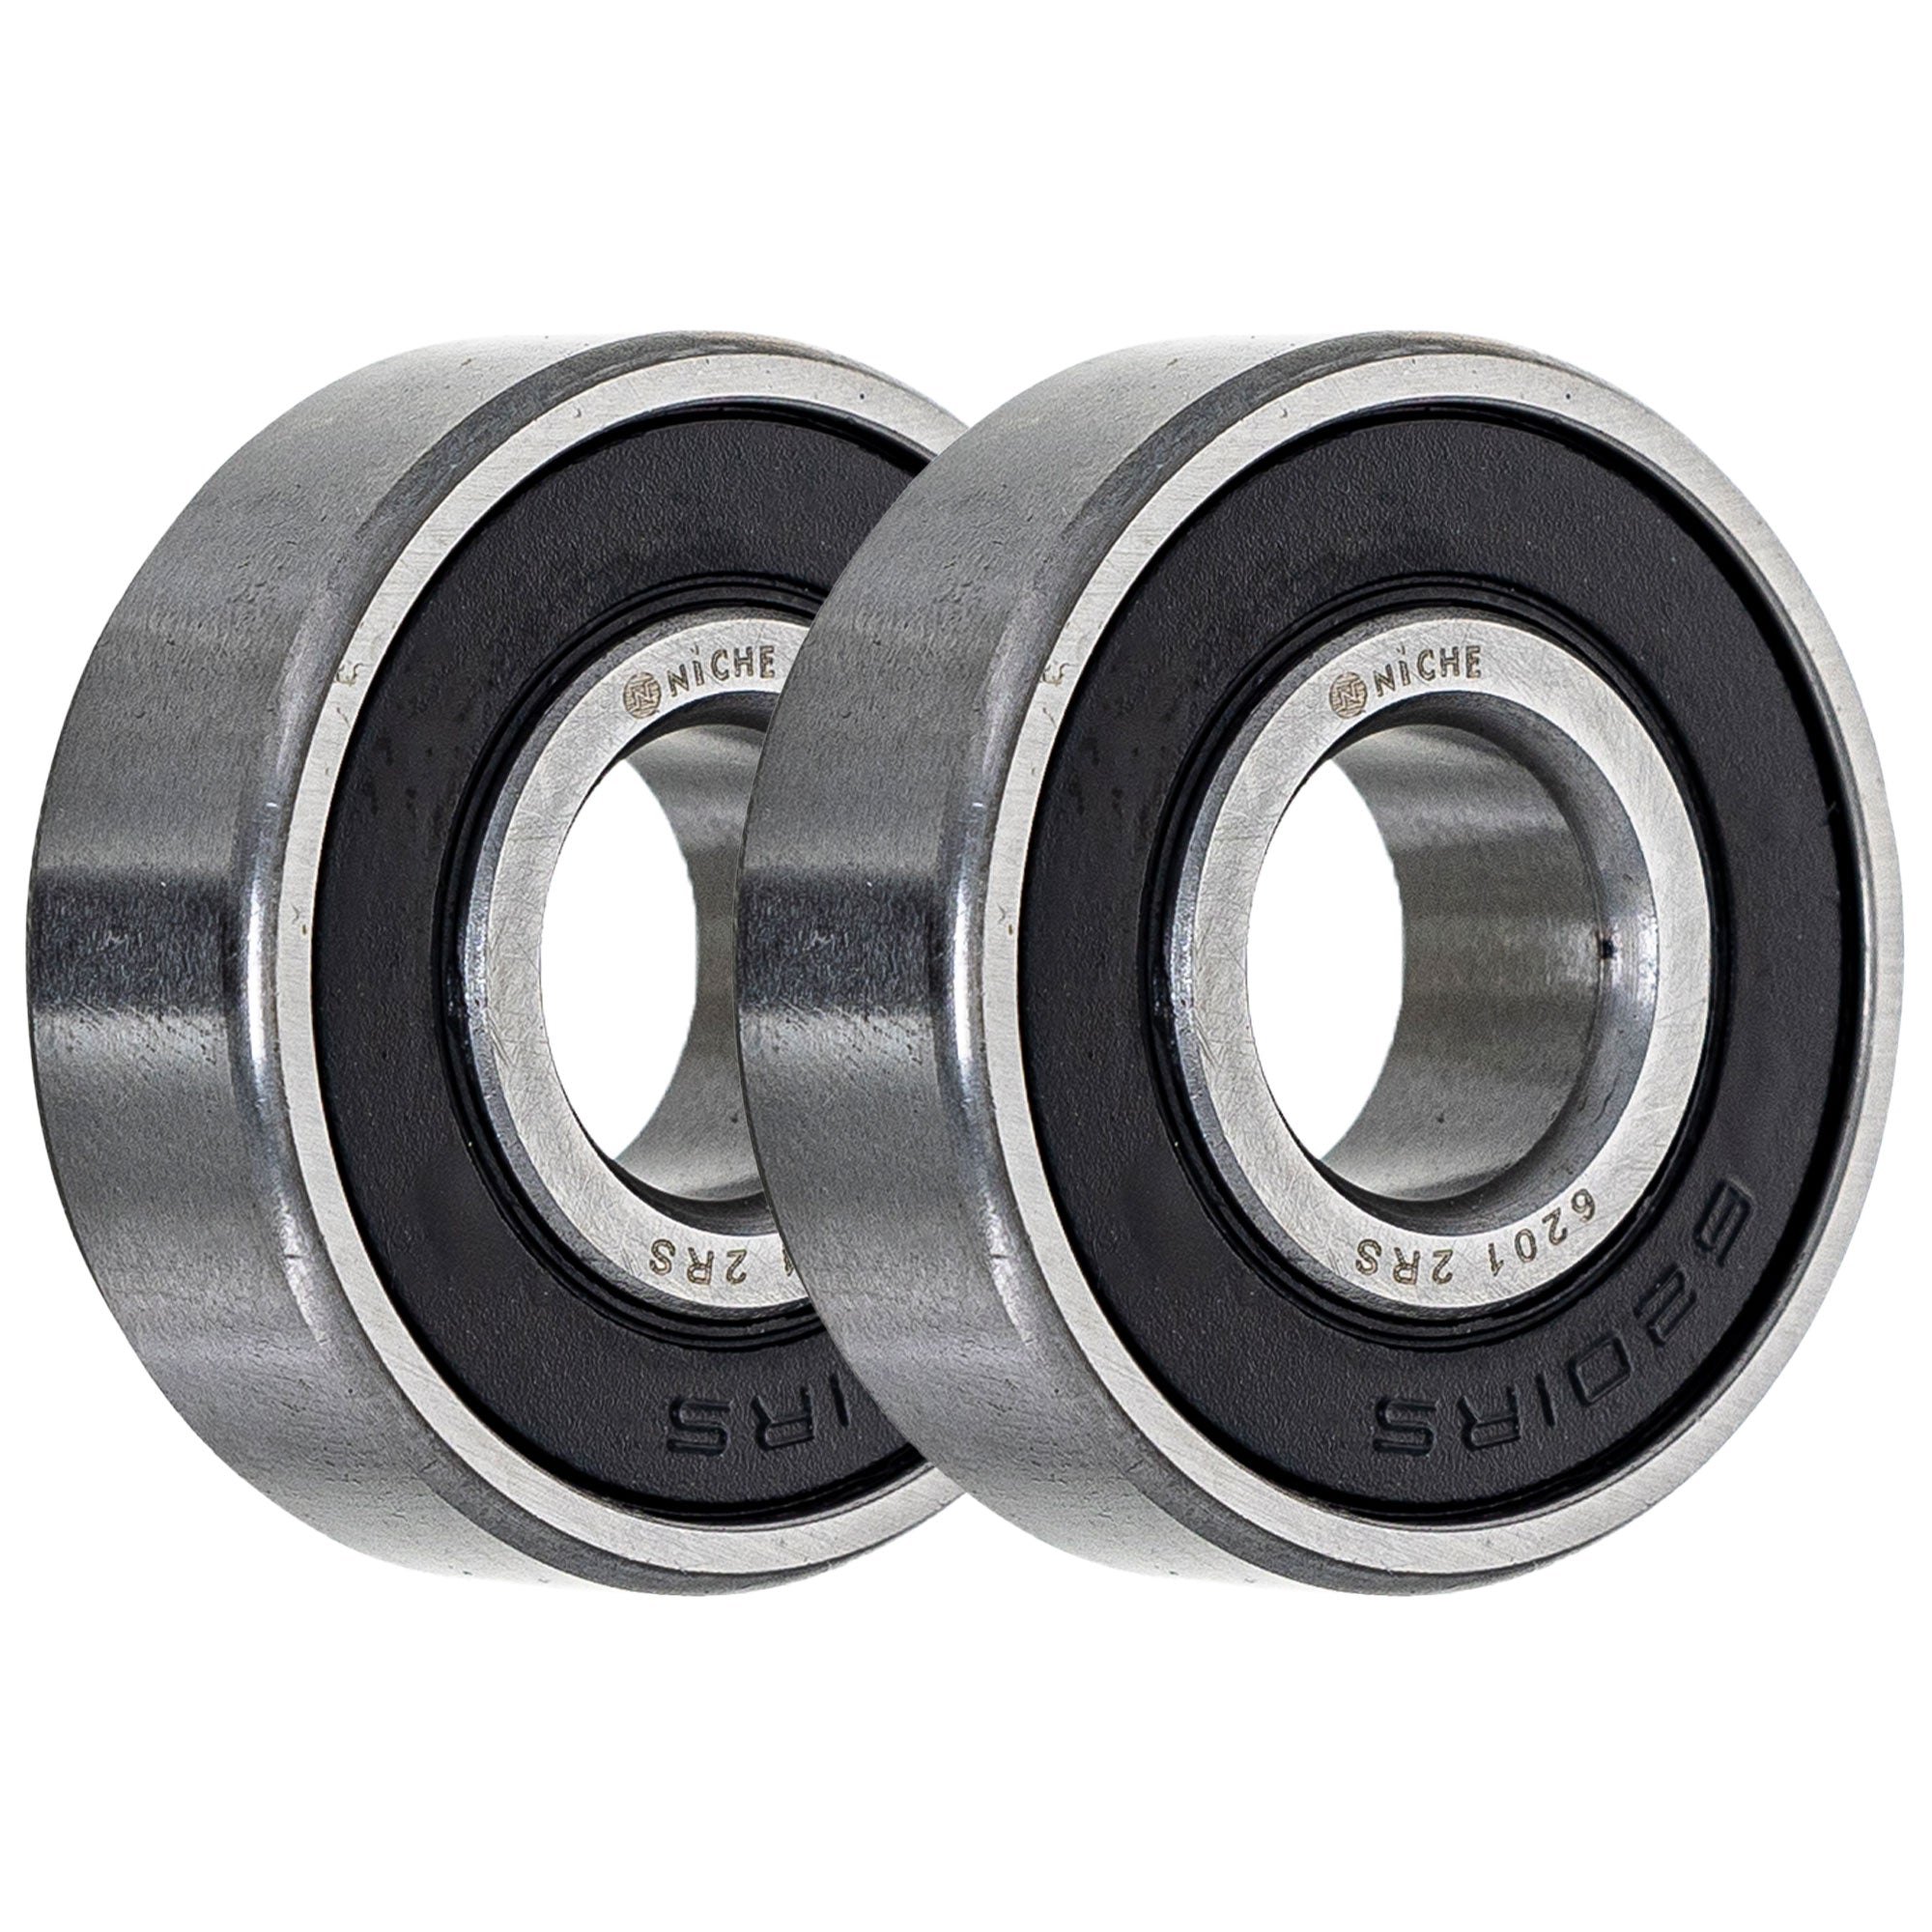 Single Row, Deep Groove, Ball Bearing Pack of 2 2-Pack for zOTHER YZ85 YZ65 XR80R XR80 NICHE 519-CBB2247R